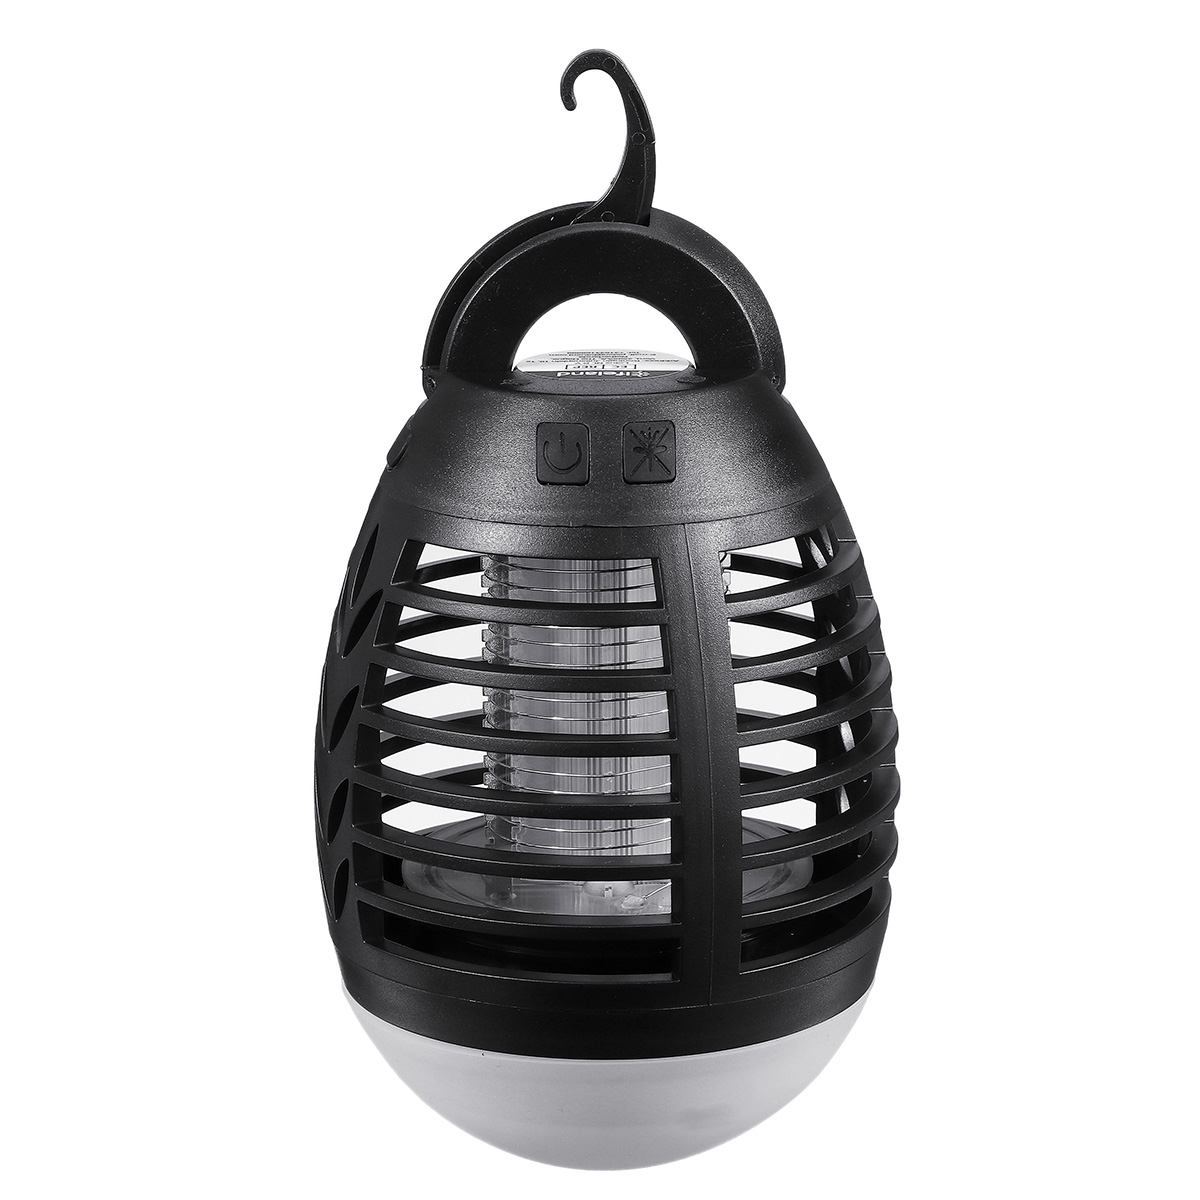 Elfeland-5W-Electric-Mosquito-Killer-Lamp-USB-Powered-Trap-Gnat-with-Hanger-for-Indoor-Outdoor-1710190-8